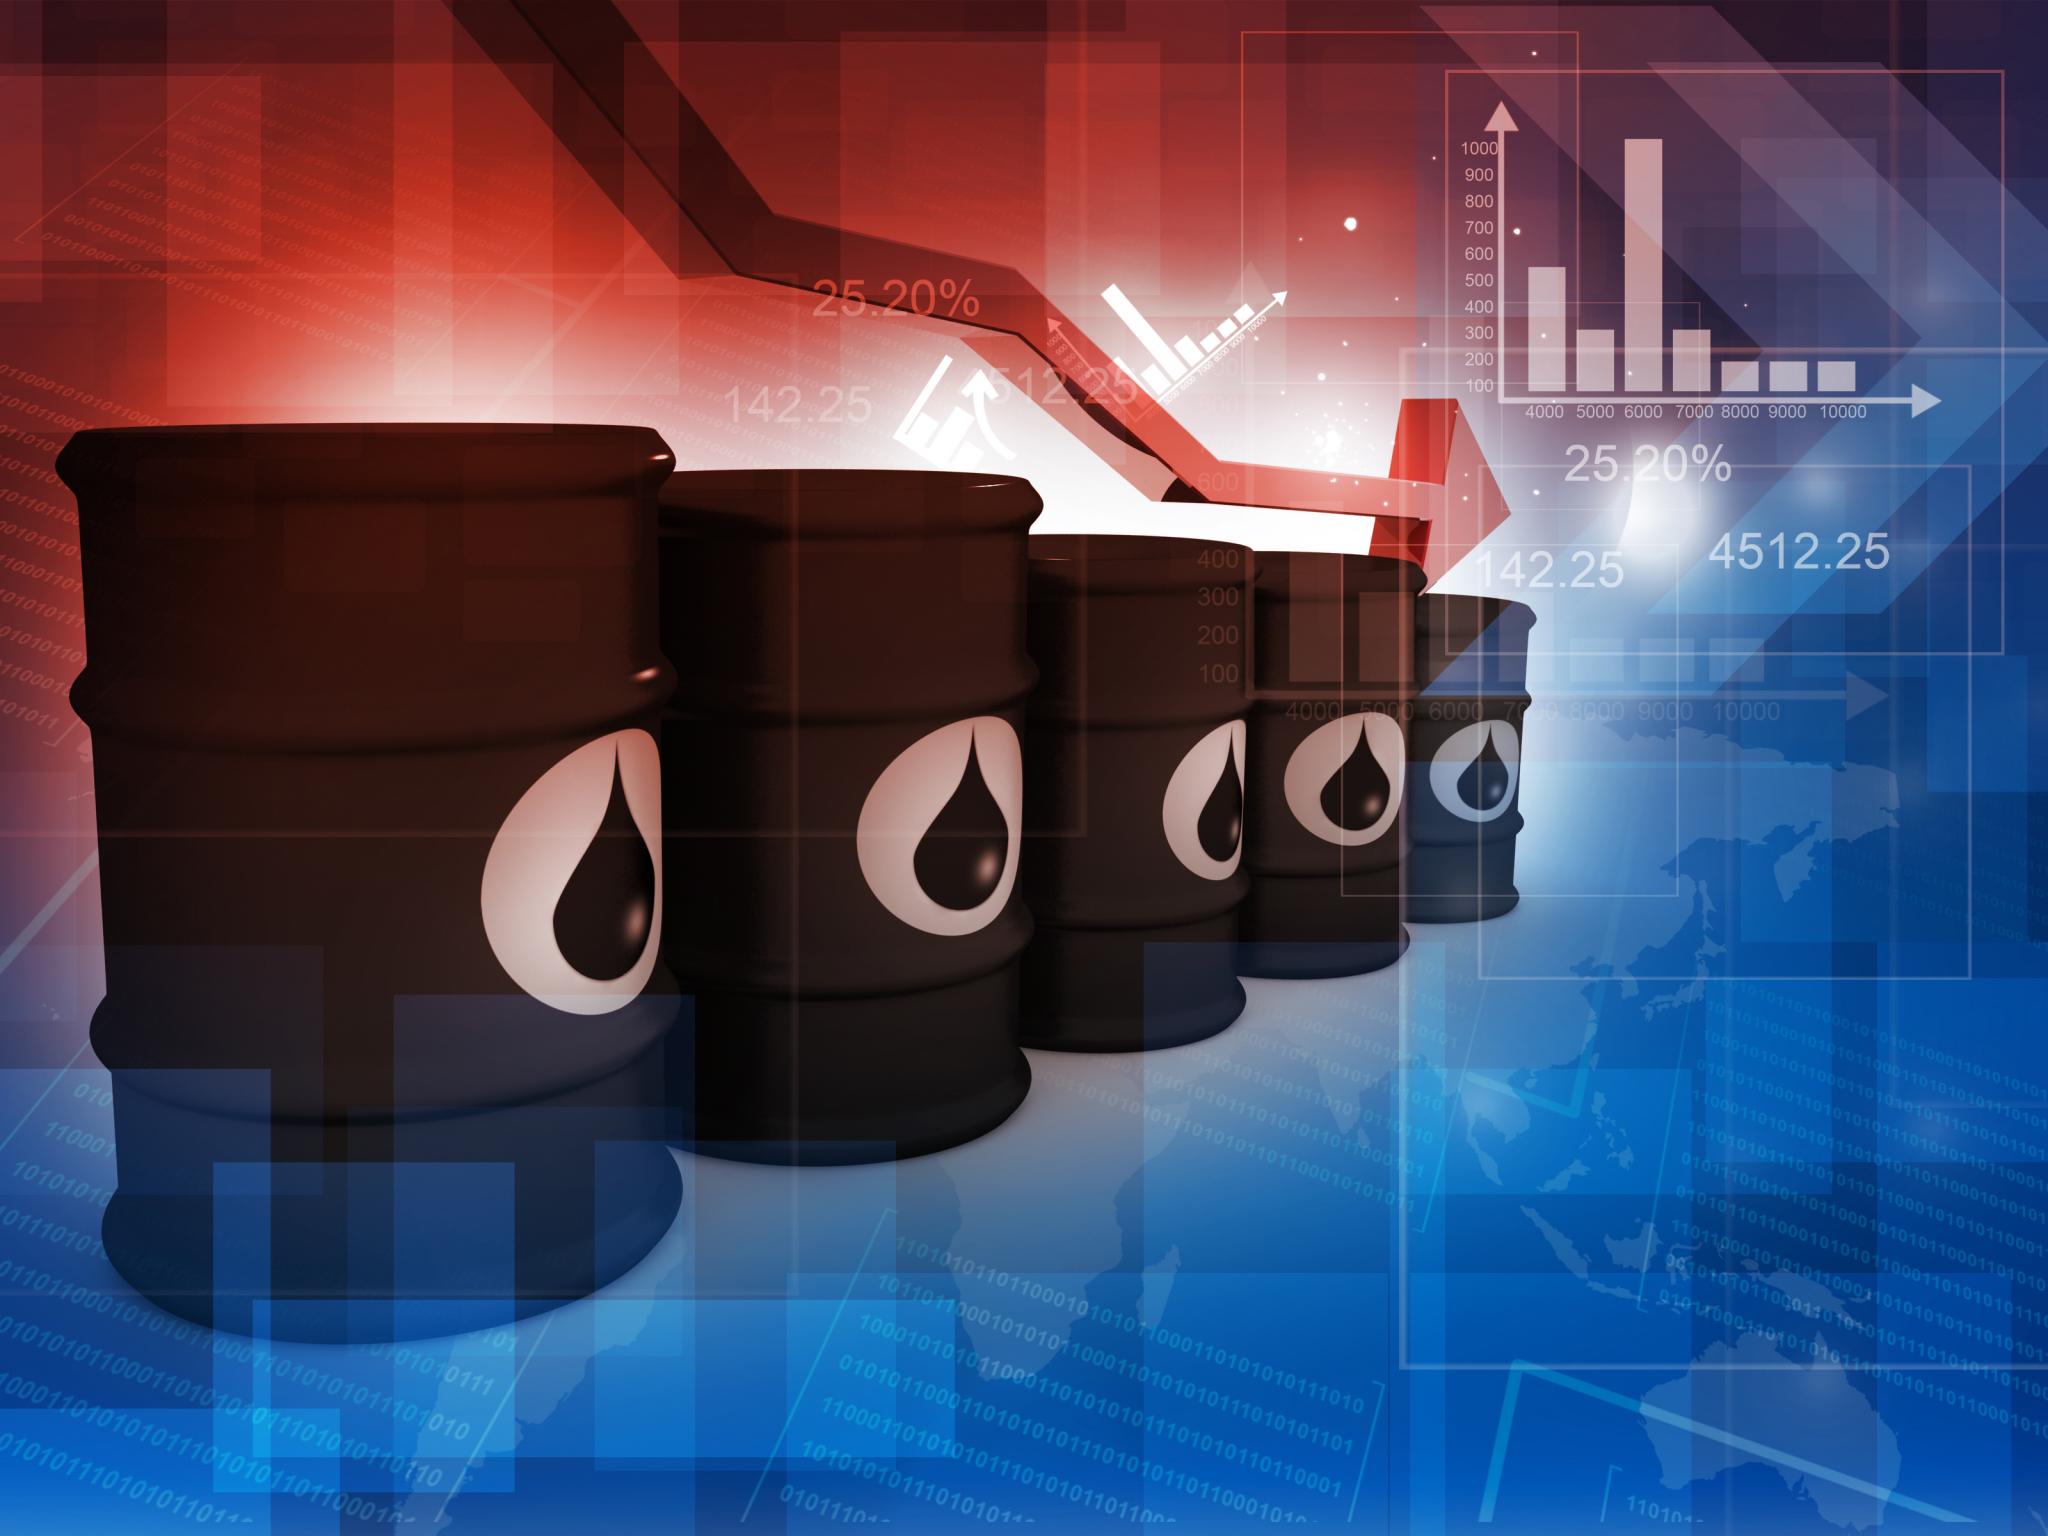  oil-hits-1-week-low-as-eu-eases-russian-sanctions-us-demand-concerns-grow 